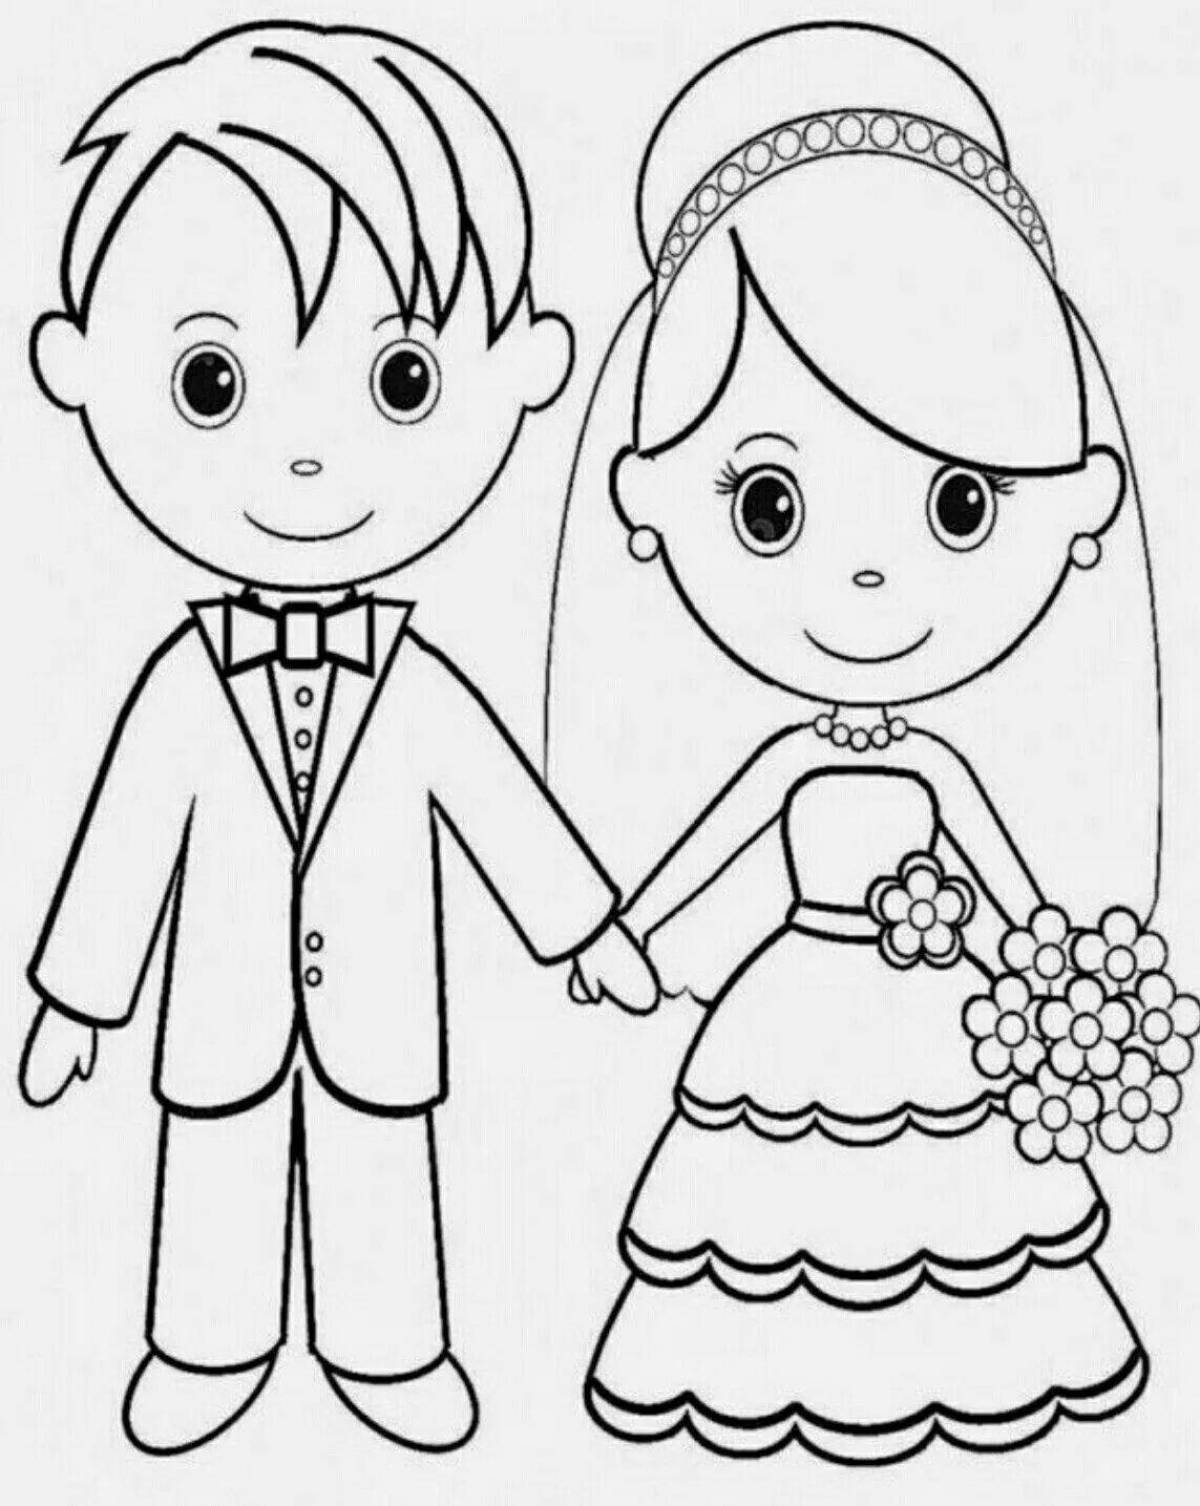 Fancy coloring of the bride and groom